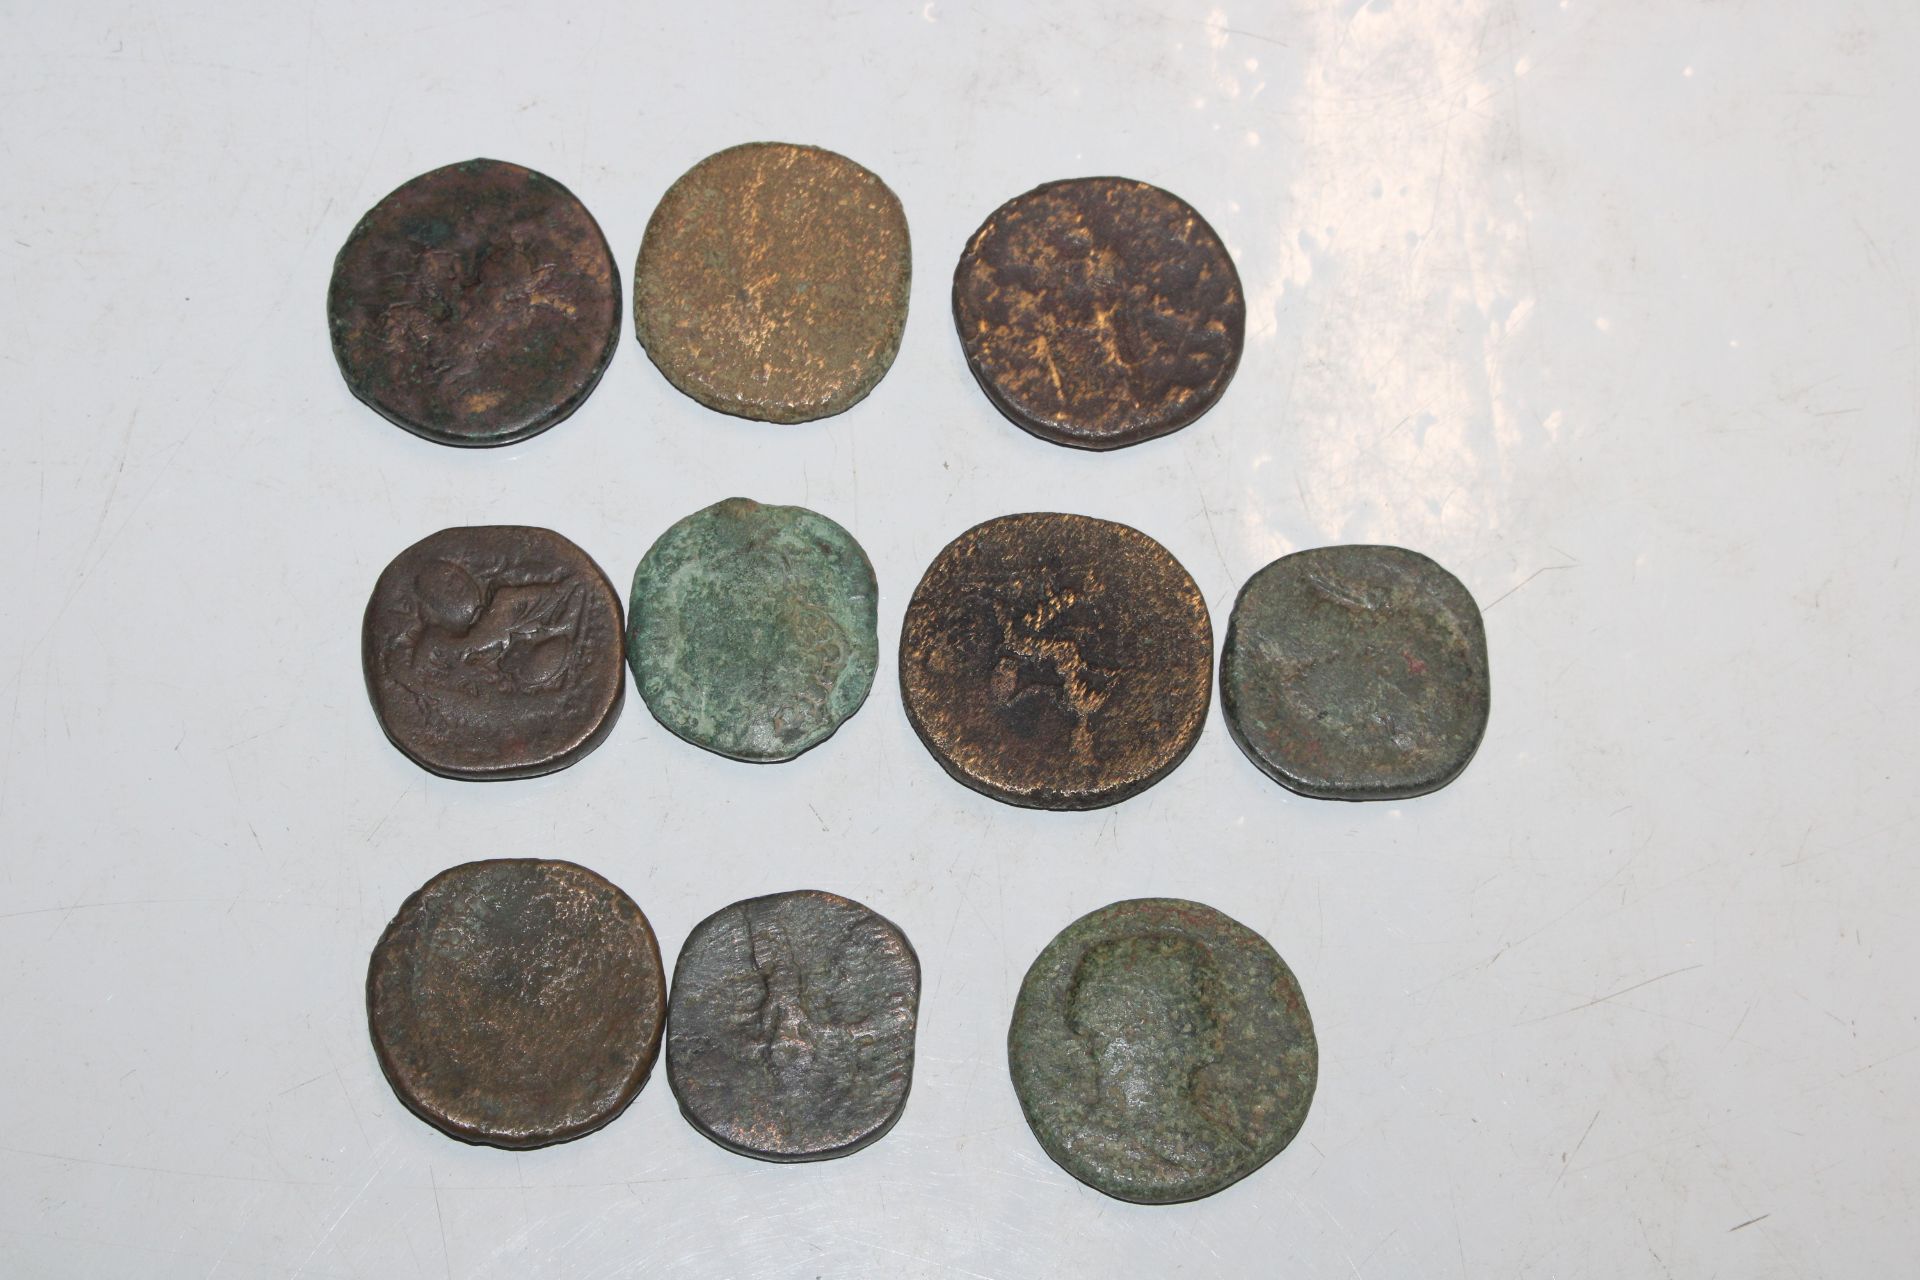 A bag of Roman coinage